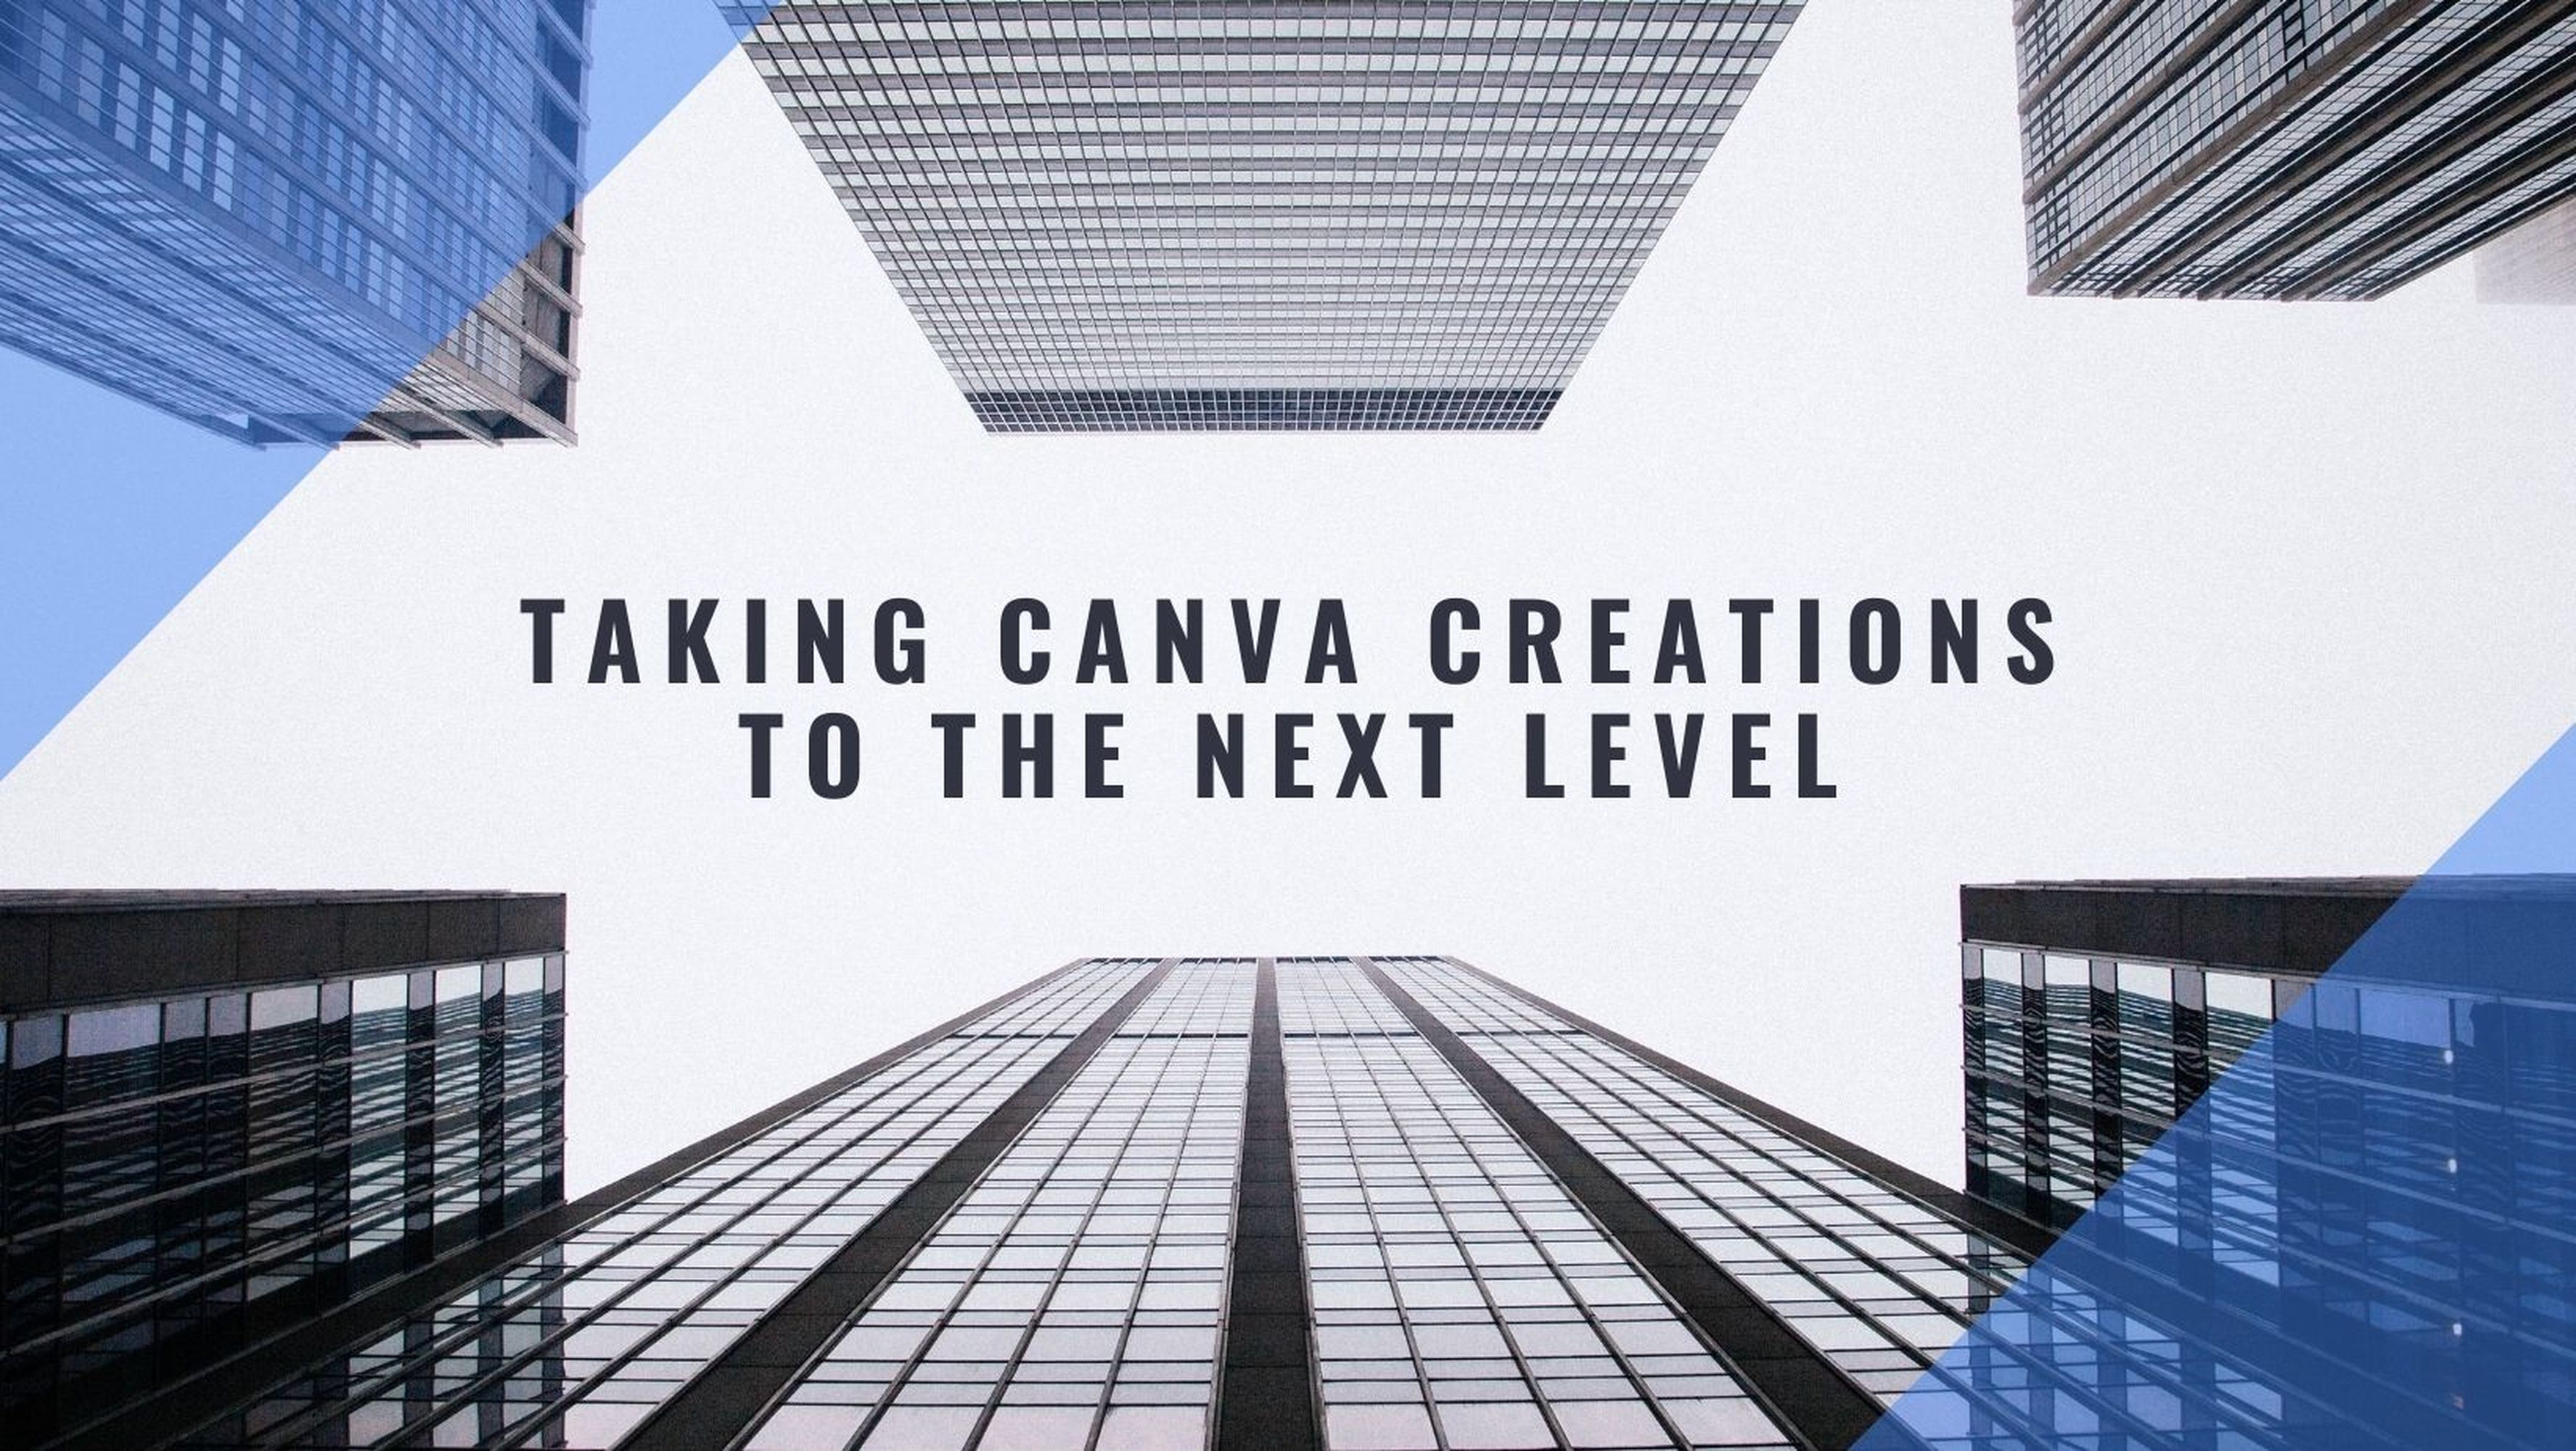 How to use Canva: A simple guide to the graphic design platform